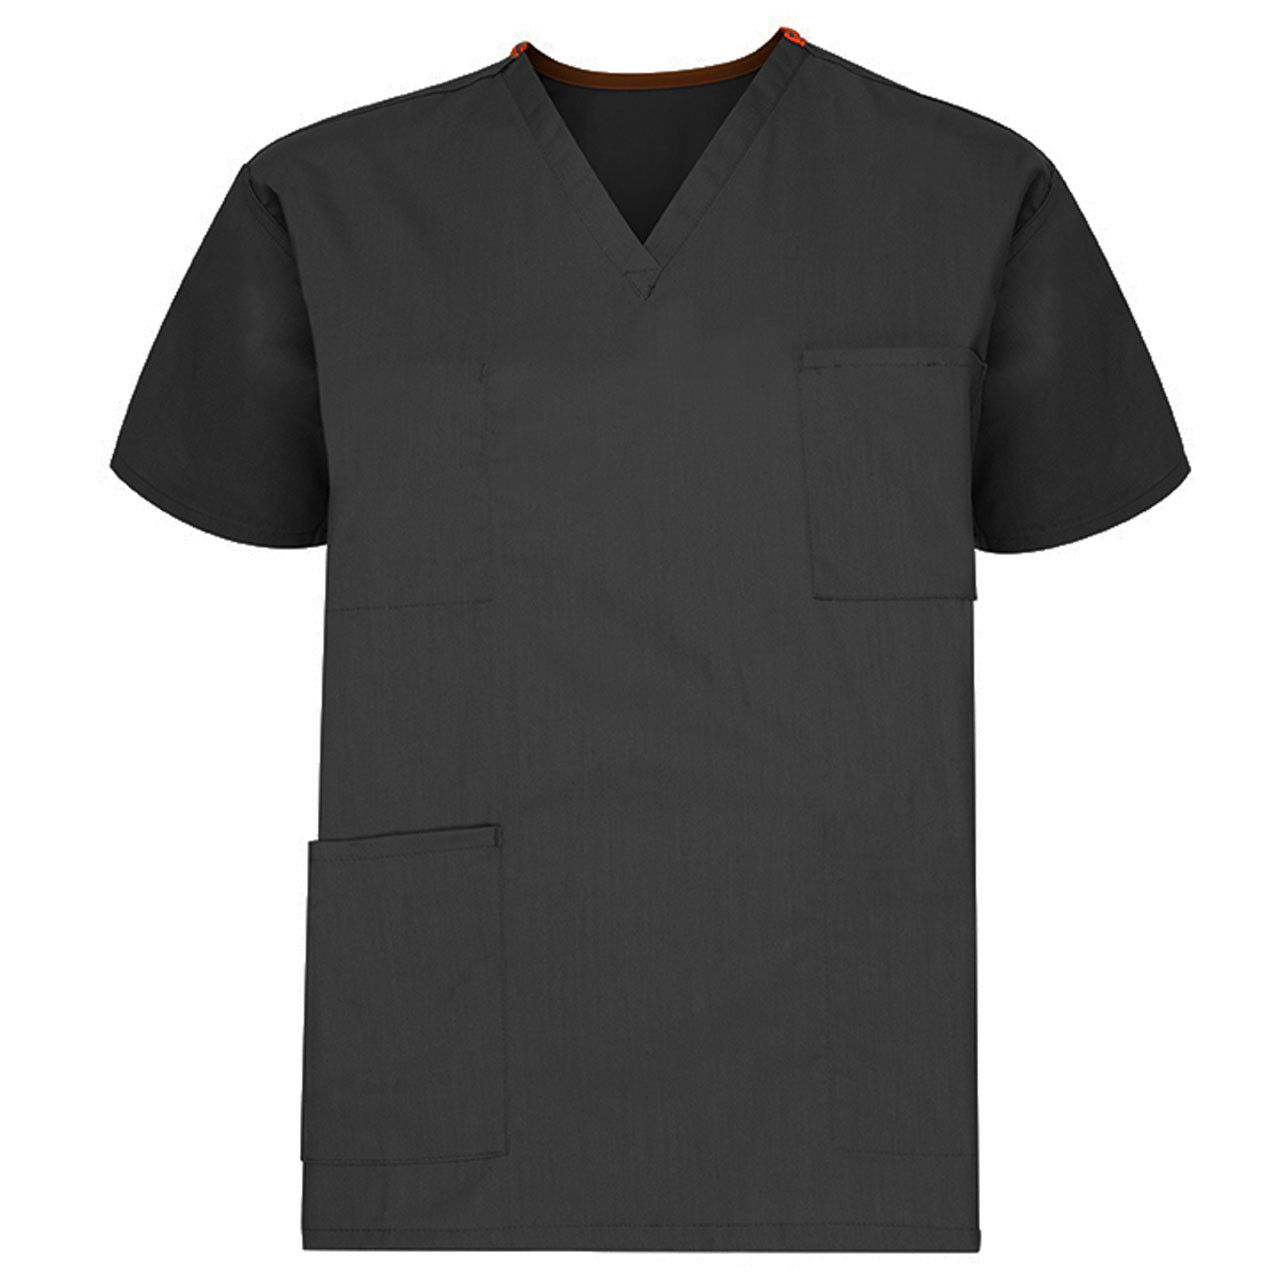 What is the color and material of the reversible scrubs in the black scrub top set?